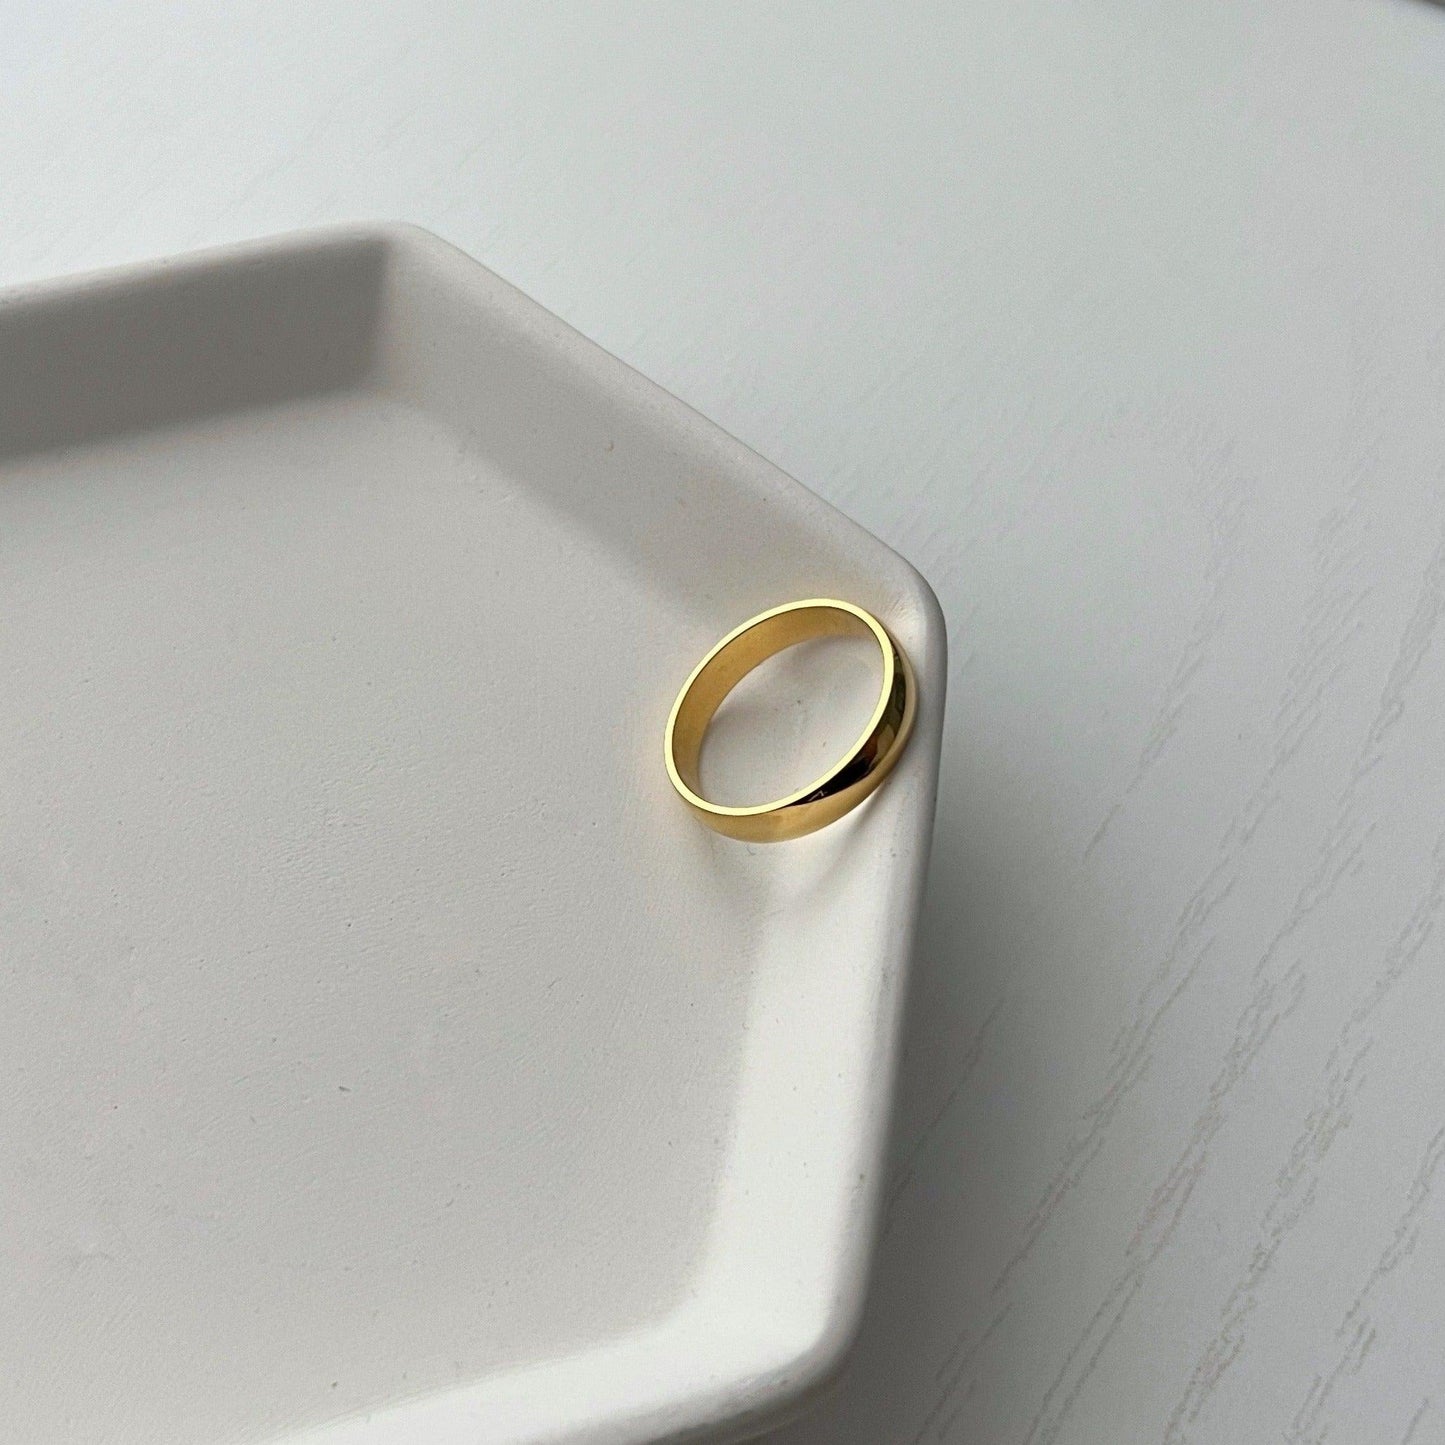 Classic Gold Band | Dainty Stacking Ring - JESSA JEWELRY | GOLD JEWELRY; dainty, affordable gold everyday jewelry. Tarnish free, water-resistant, hypoallergenic. Jewelry for everyday wear